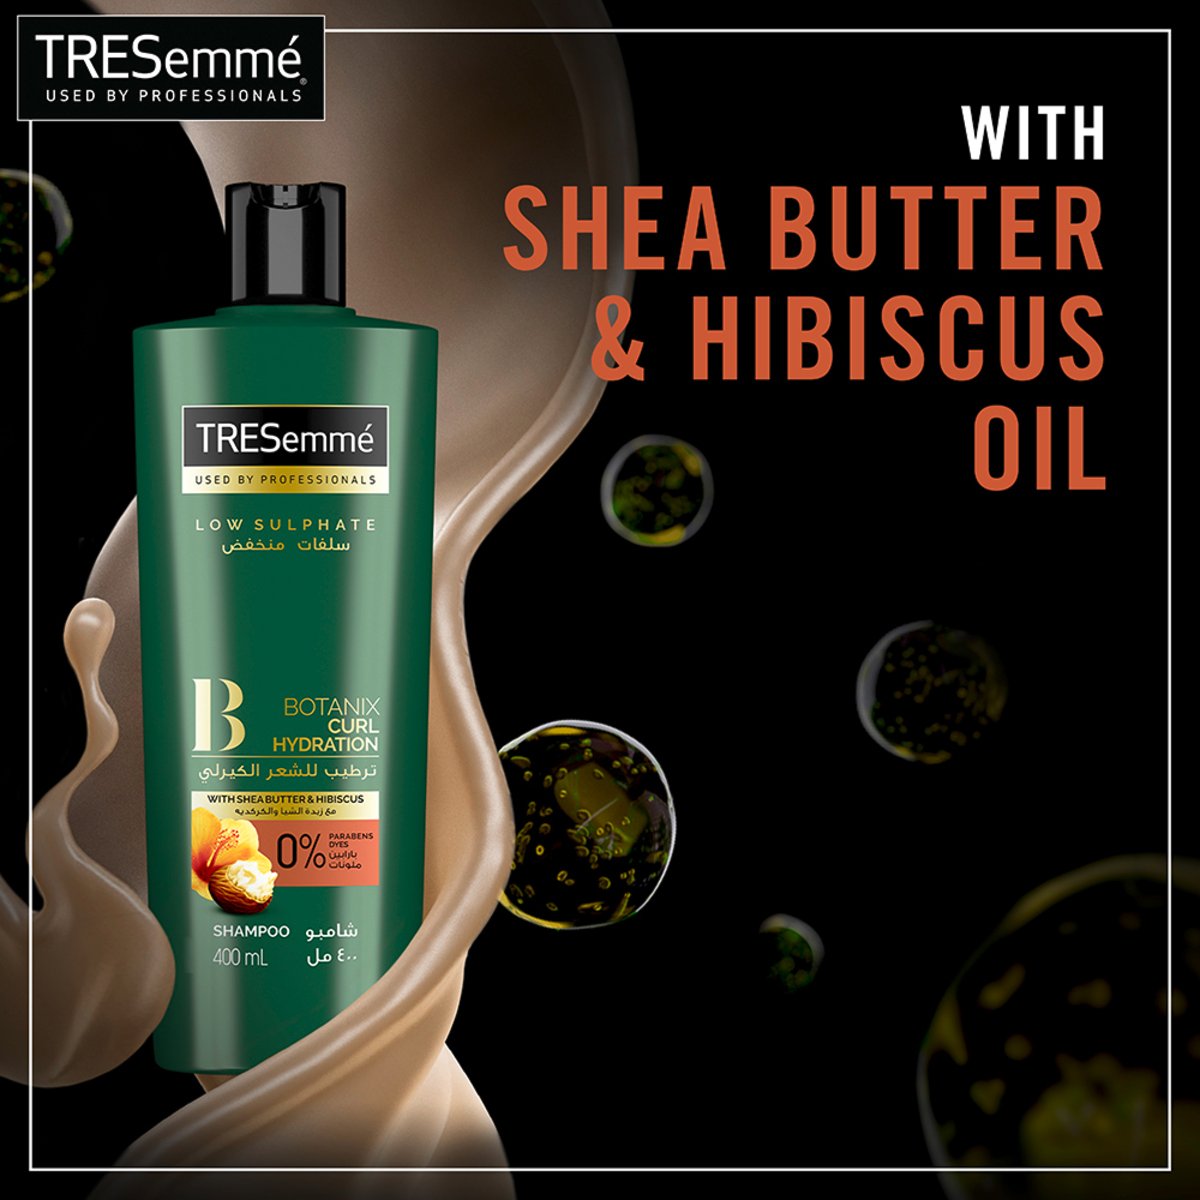 TRESemme Botanix Natural Shampoo for Curl Hydration with Shea Butter & Hibiscus 400 ml